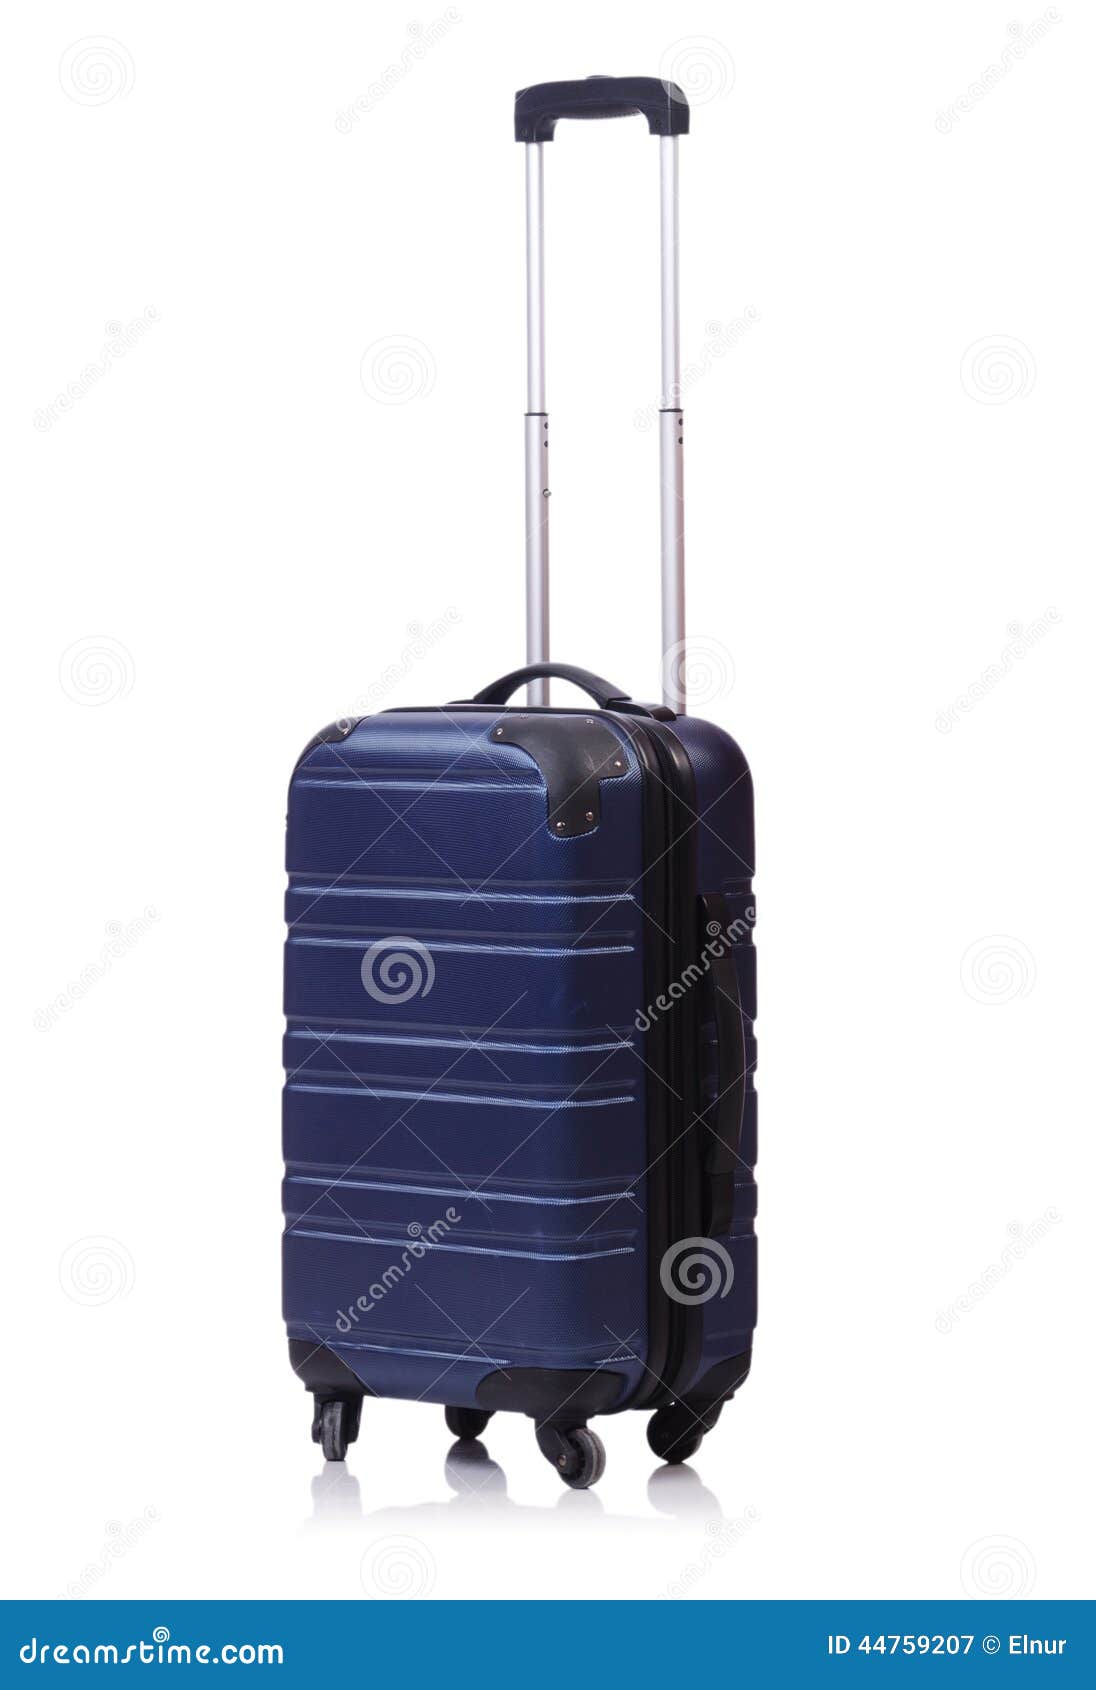 Travel Concept with Luggage Suitacase Isolated Stock Image - Image of ...